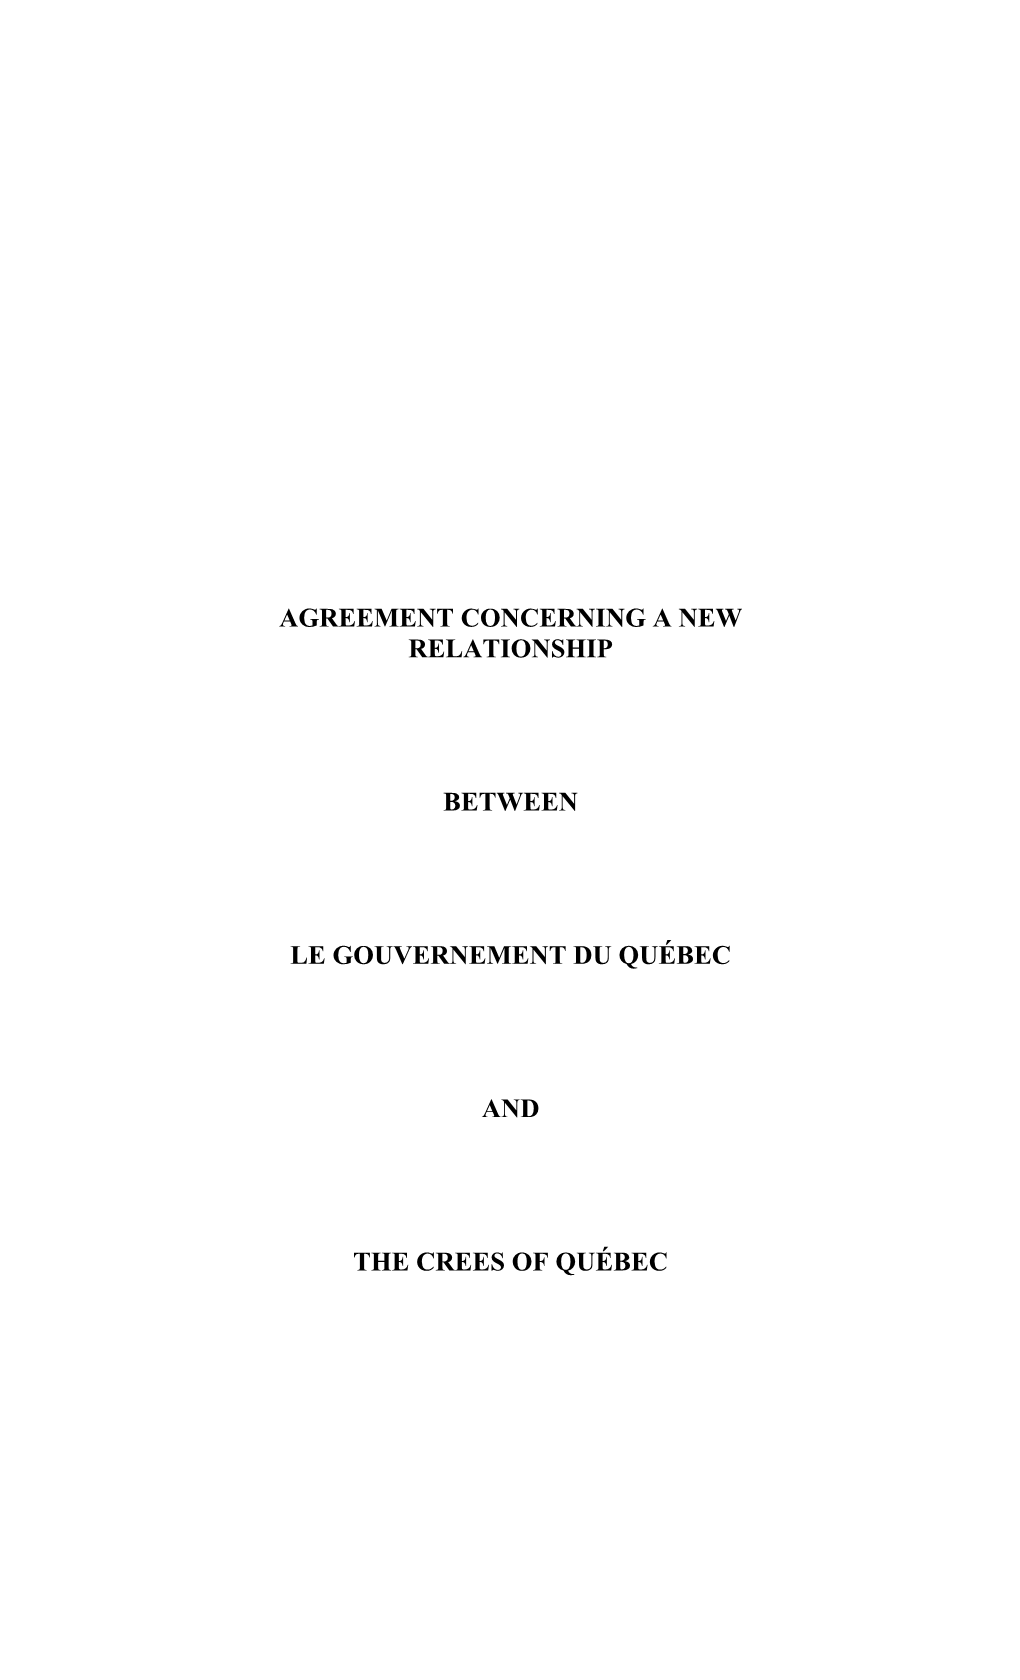 Agreement Concerning a New Relationship Between Le Gouvernement Du Québec and the Crees of Québec Dated February 7Th, 2002